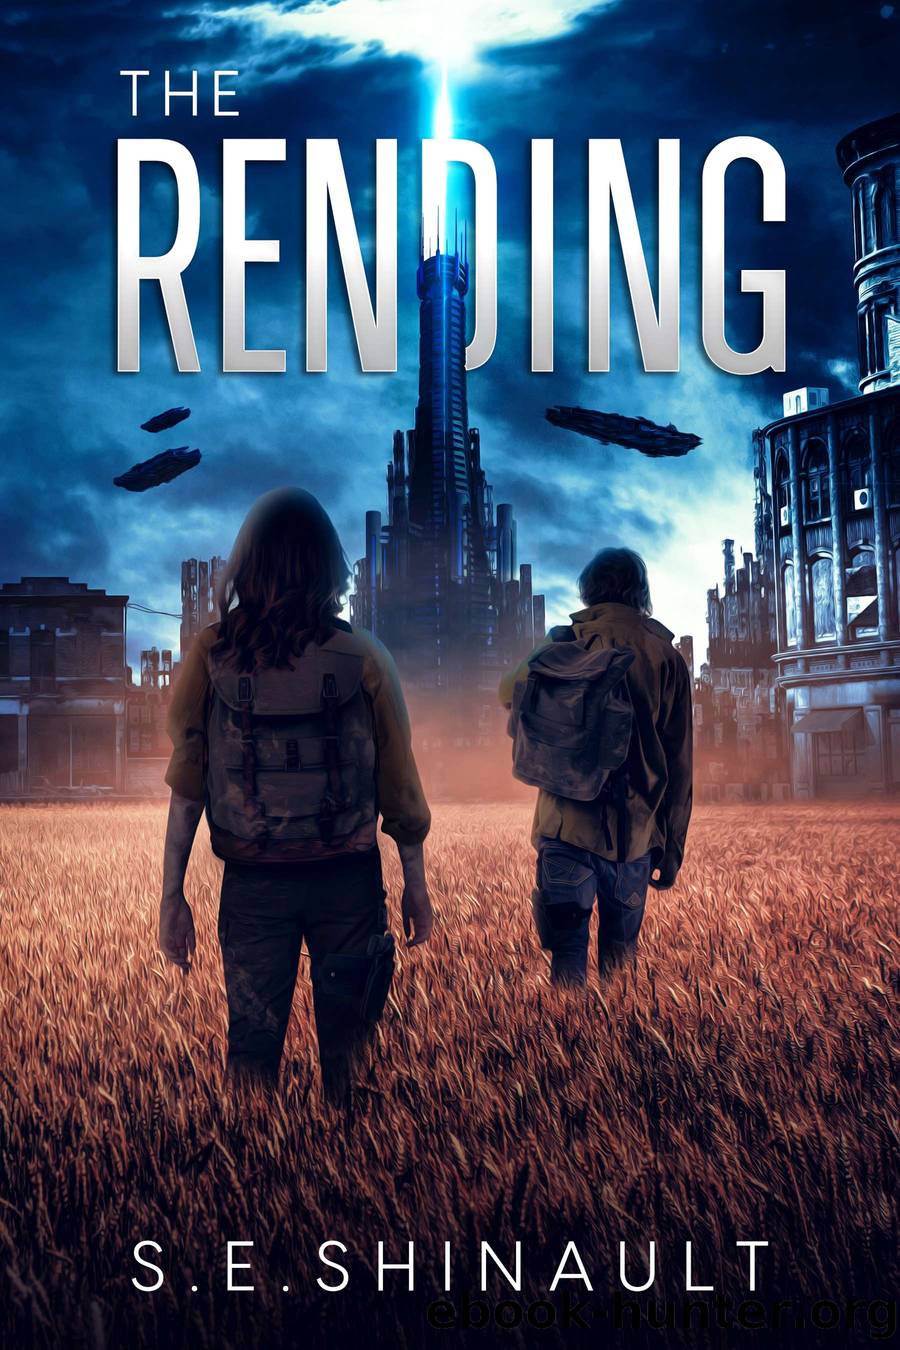 The Rending by S. E. Shinault